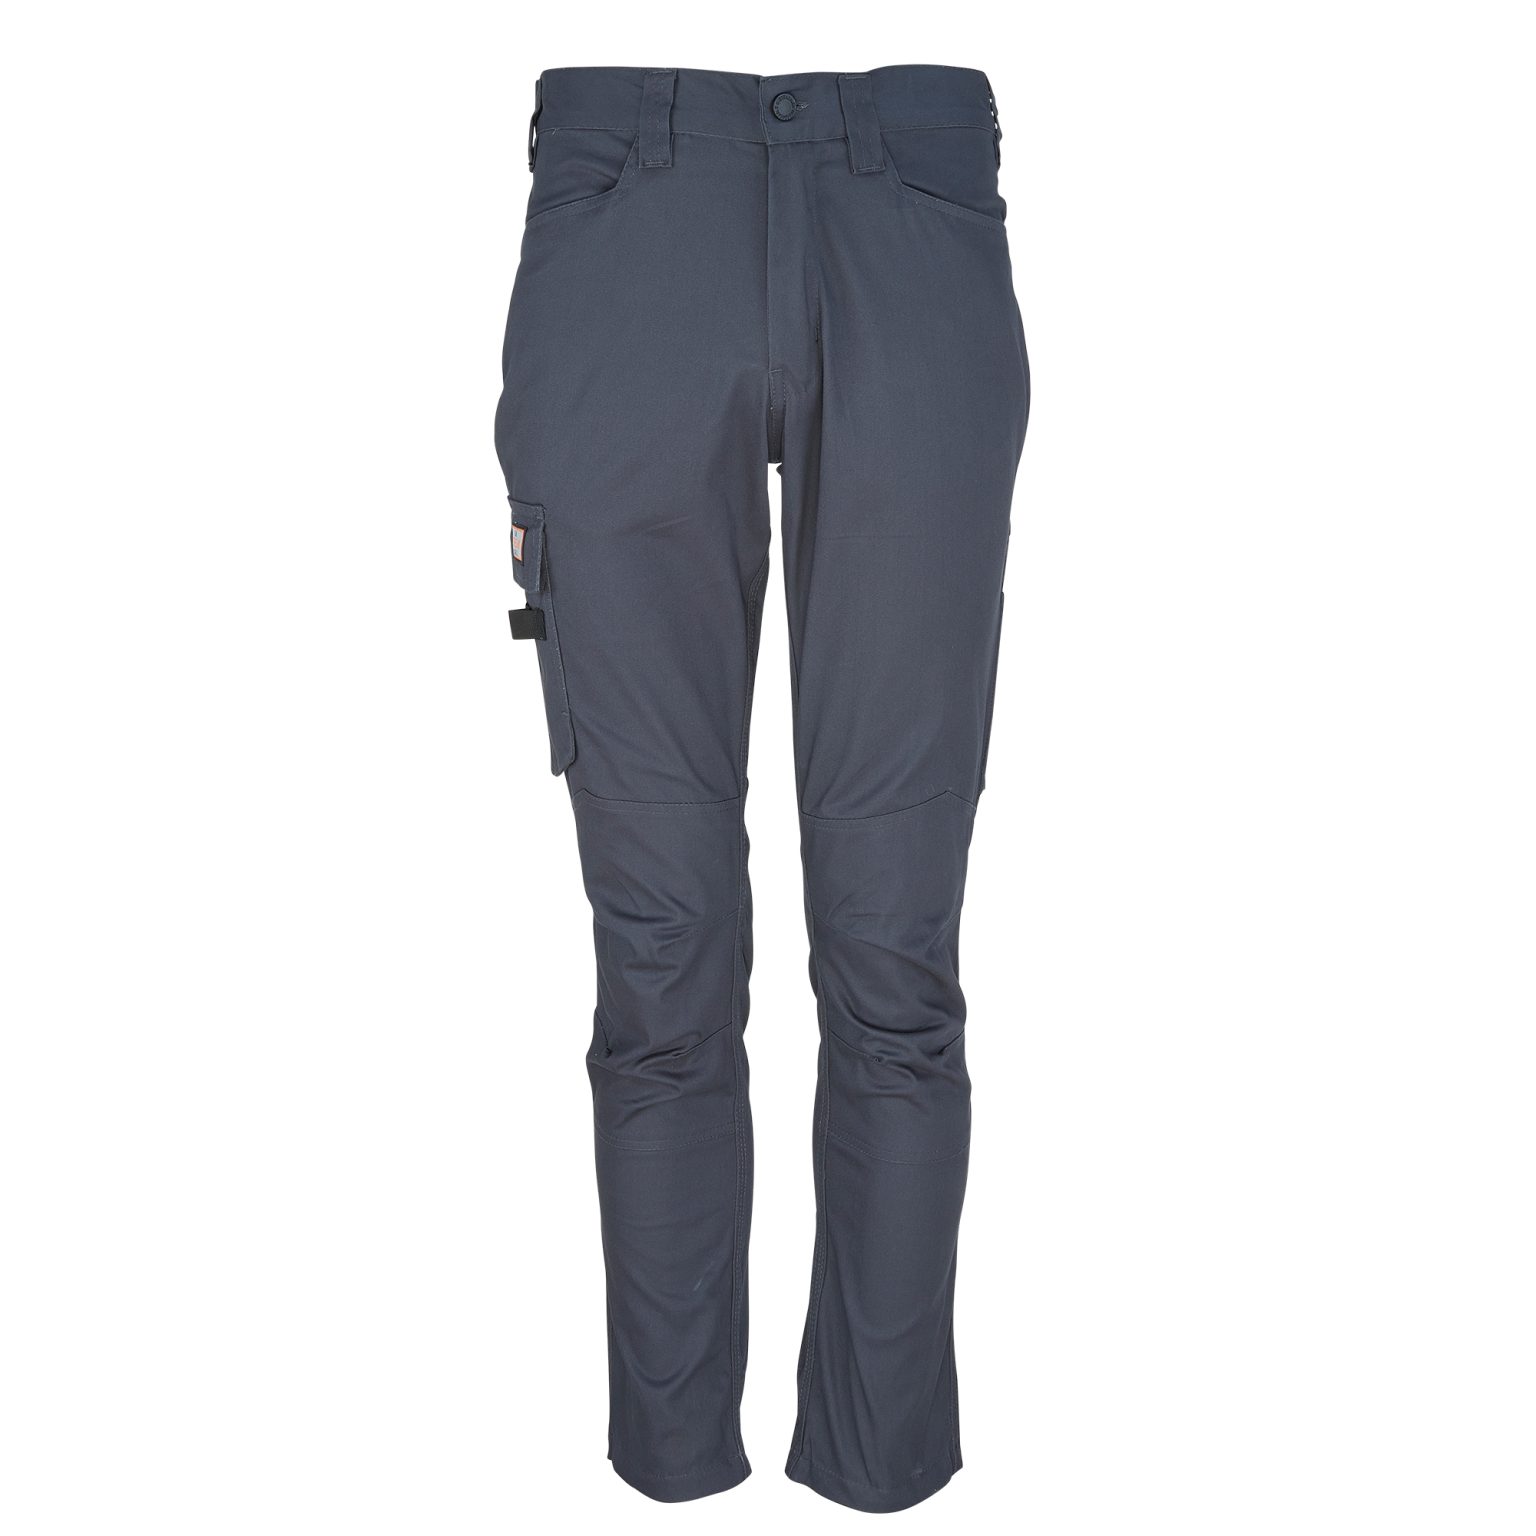 Work Trousers Archives - Unbreakable Workwear